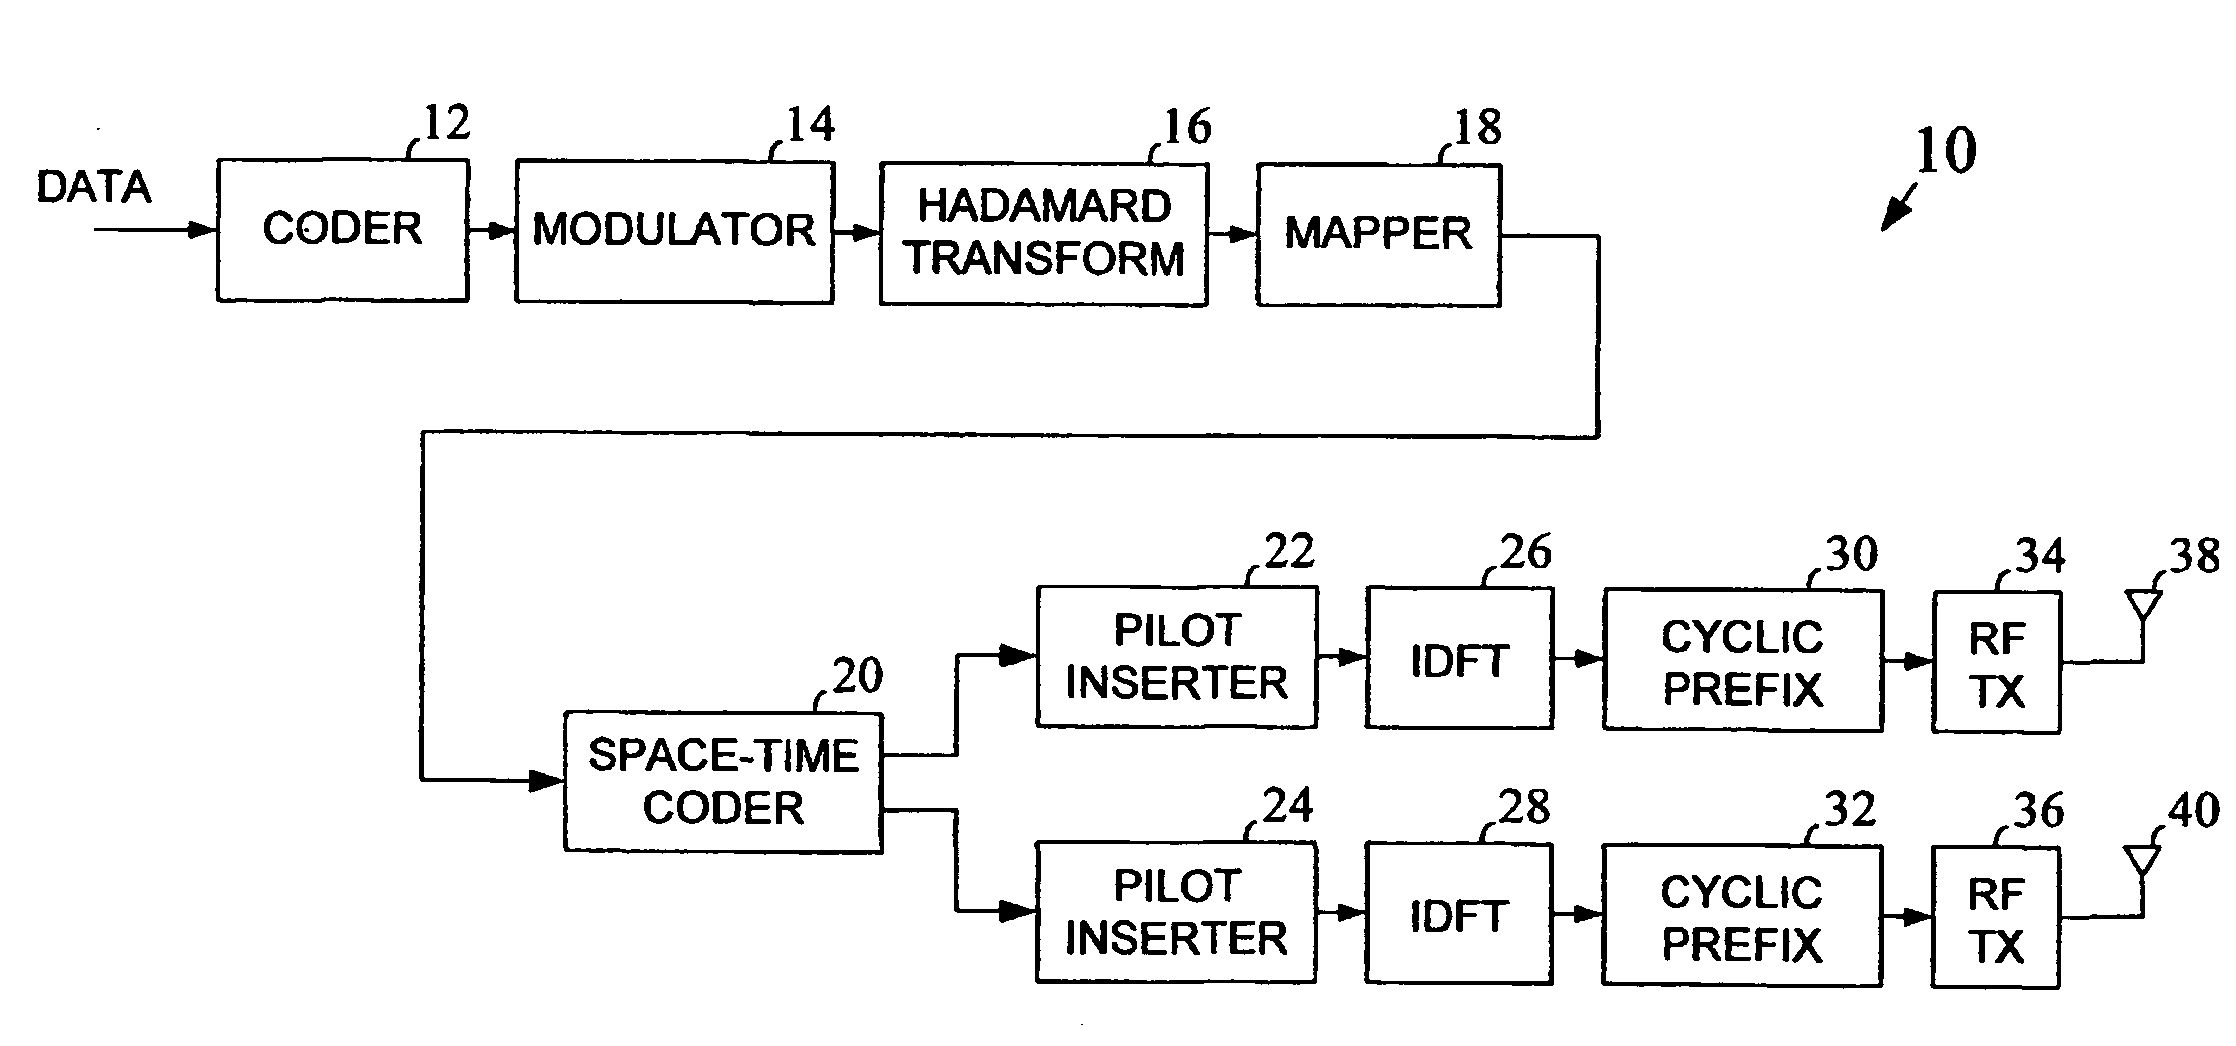 Method and Apparatus to Improve Performance in a Multicarrier Mimo Channel Using the Hadamard Transform